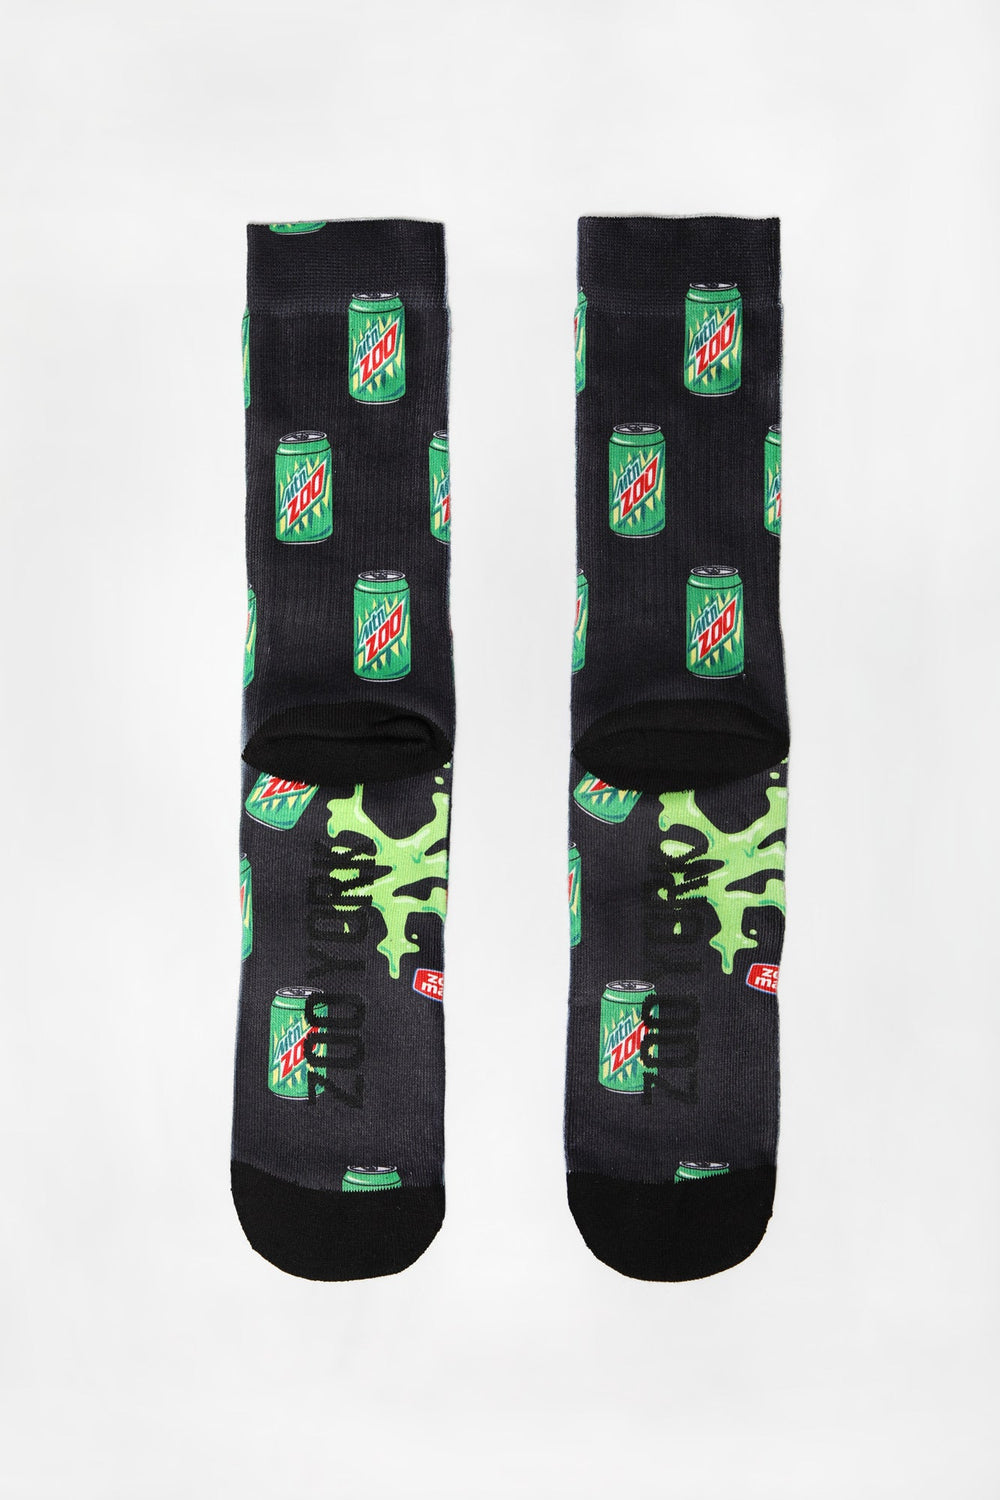 Chaussettes Mtn Zoo Zoo York Homme Chaussettes Mtn Zoo Zoo York Homme